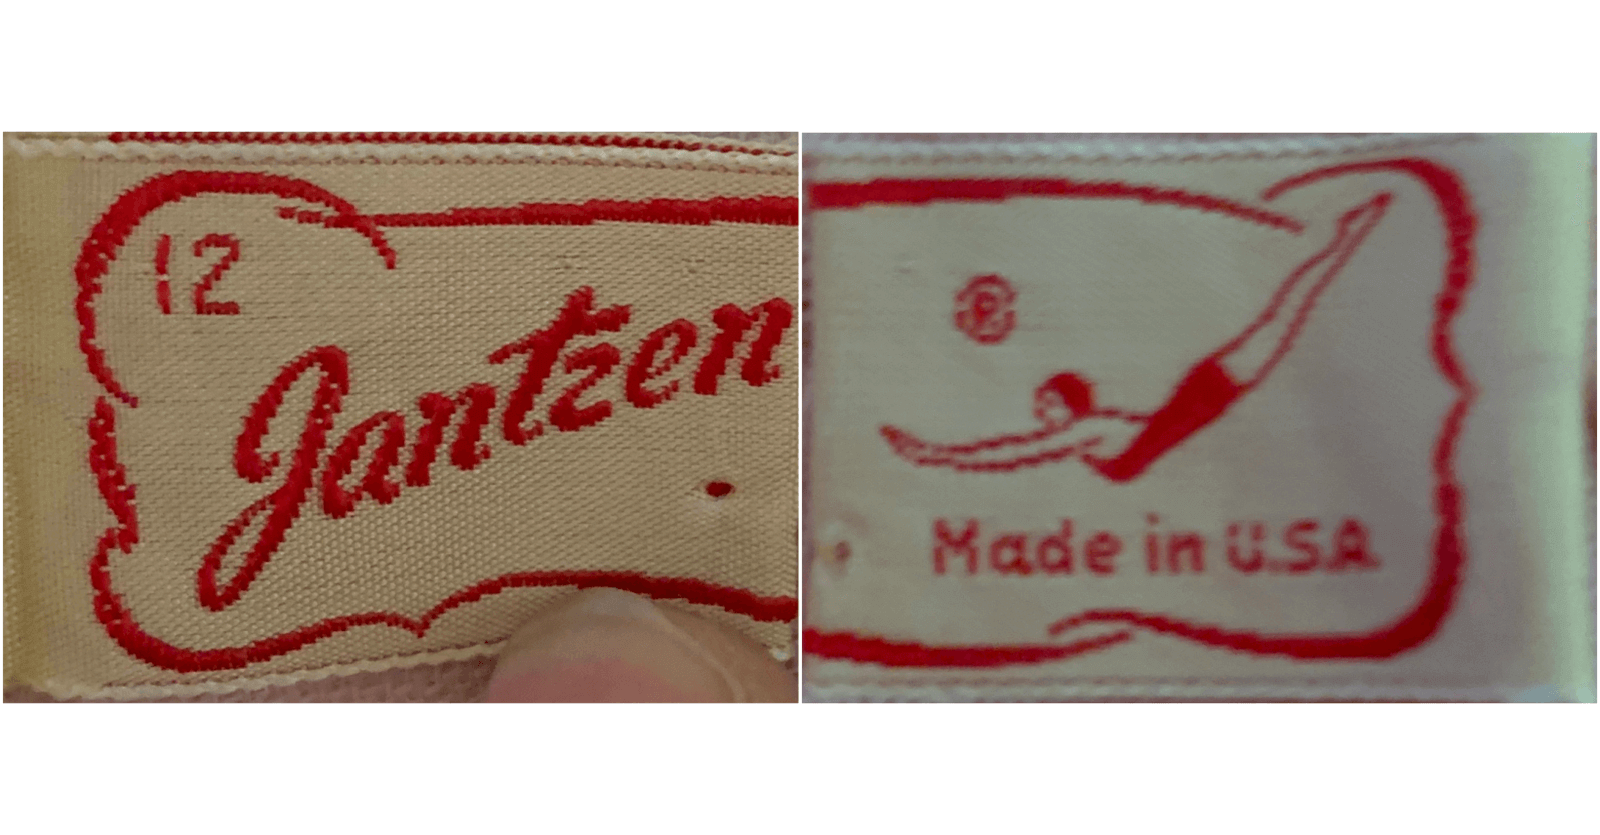 from a pair of early-1950s shorts - Courtesy of Inez Underwood Collection